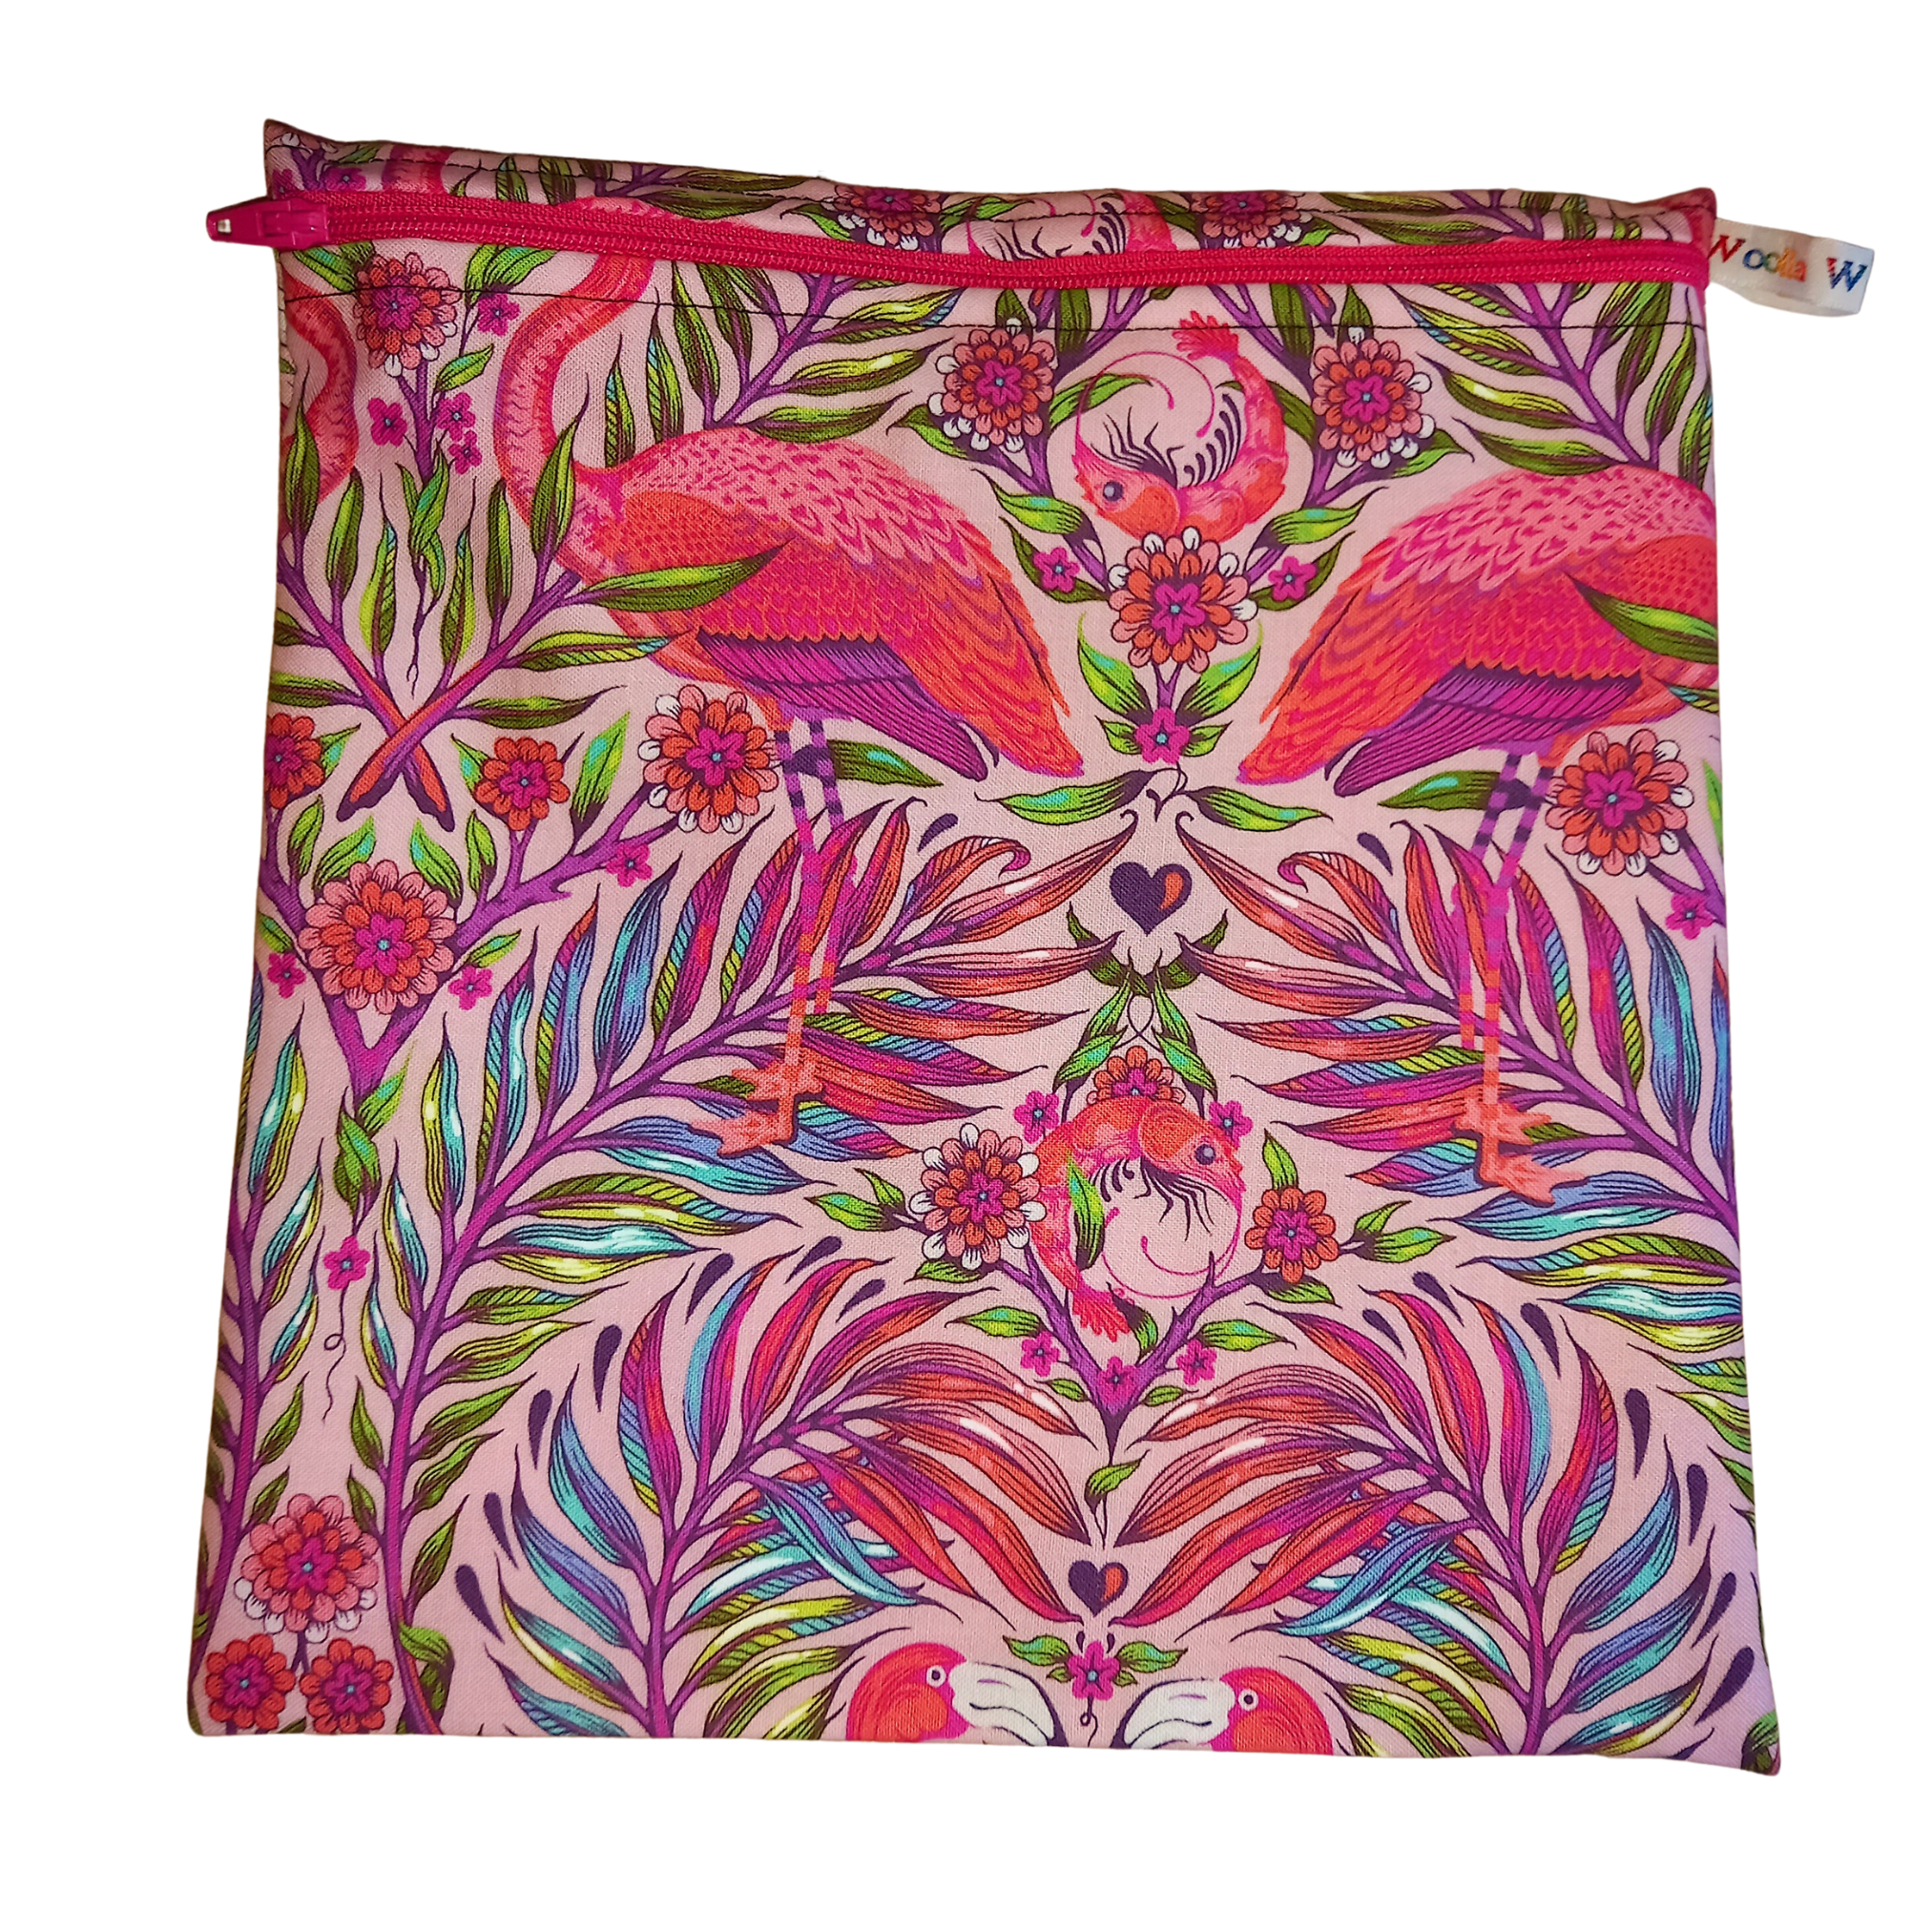 Flamingo Pink TU - Large Poppins Pouch - Waterproof, Washable, Food Safe, Vegan, Lined Zip Bag